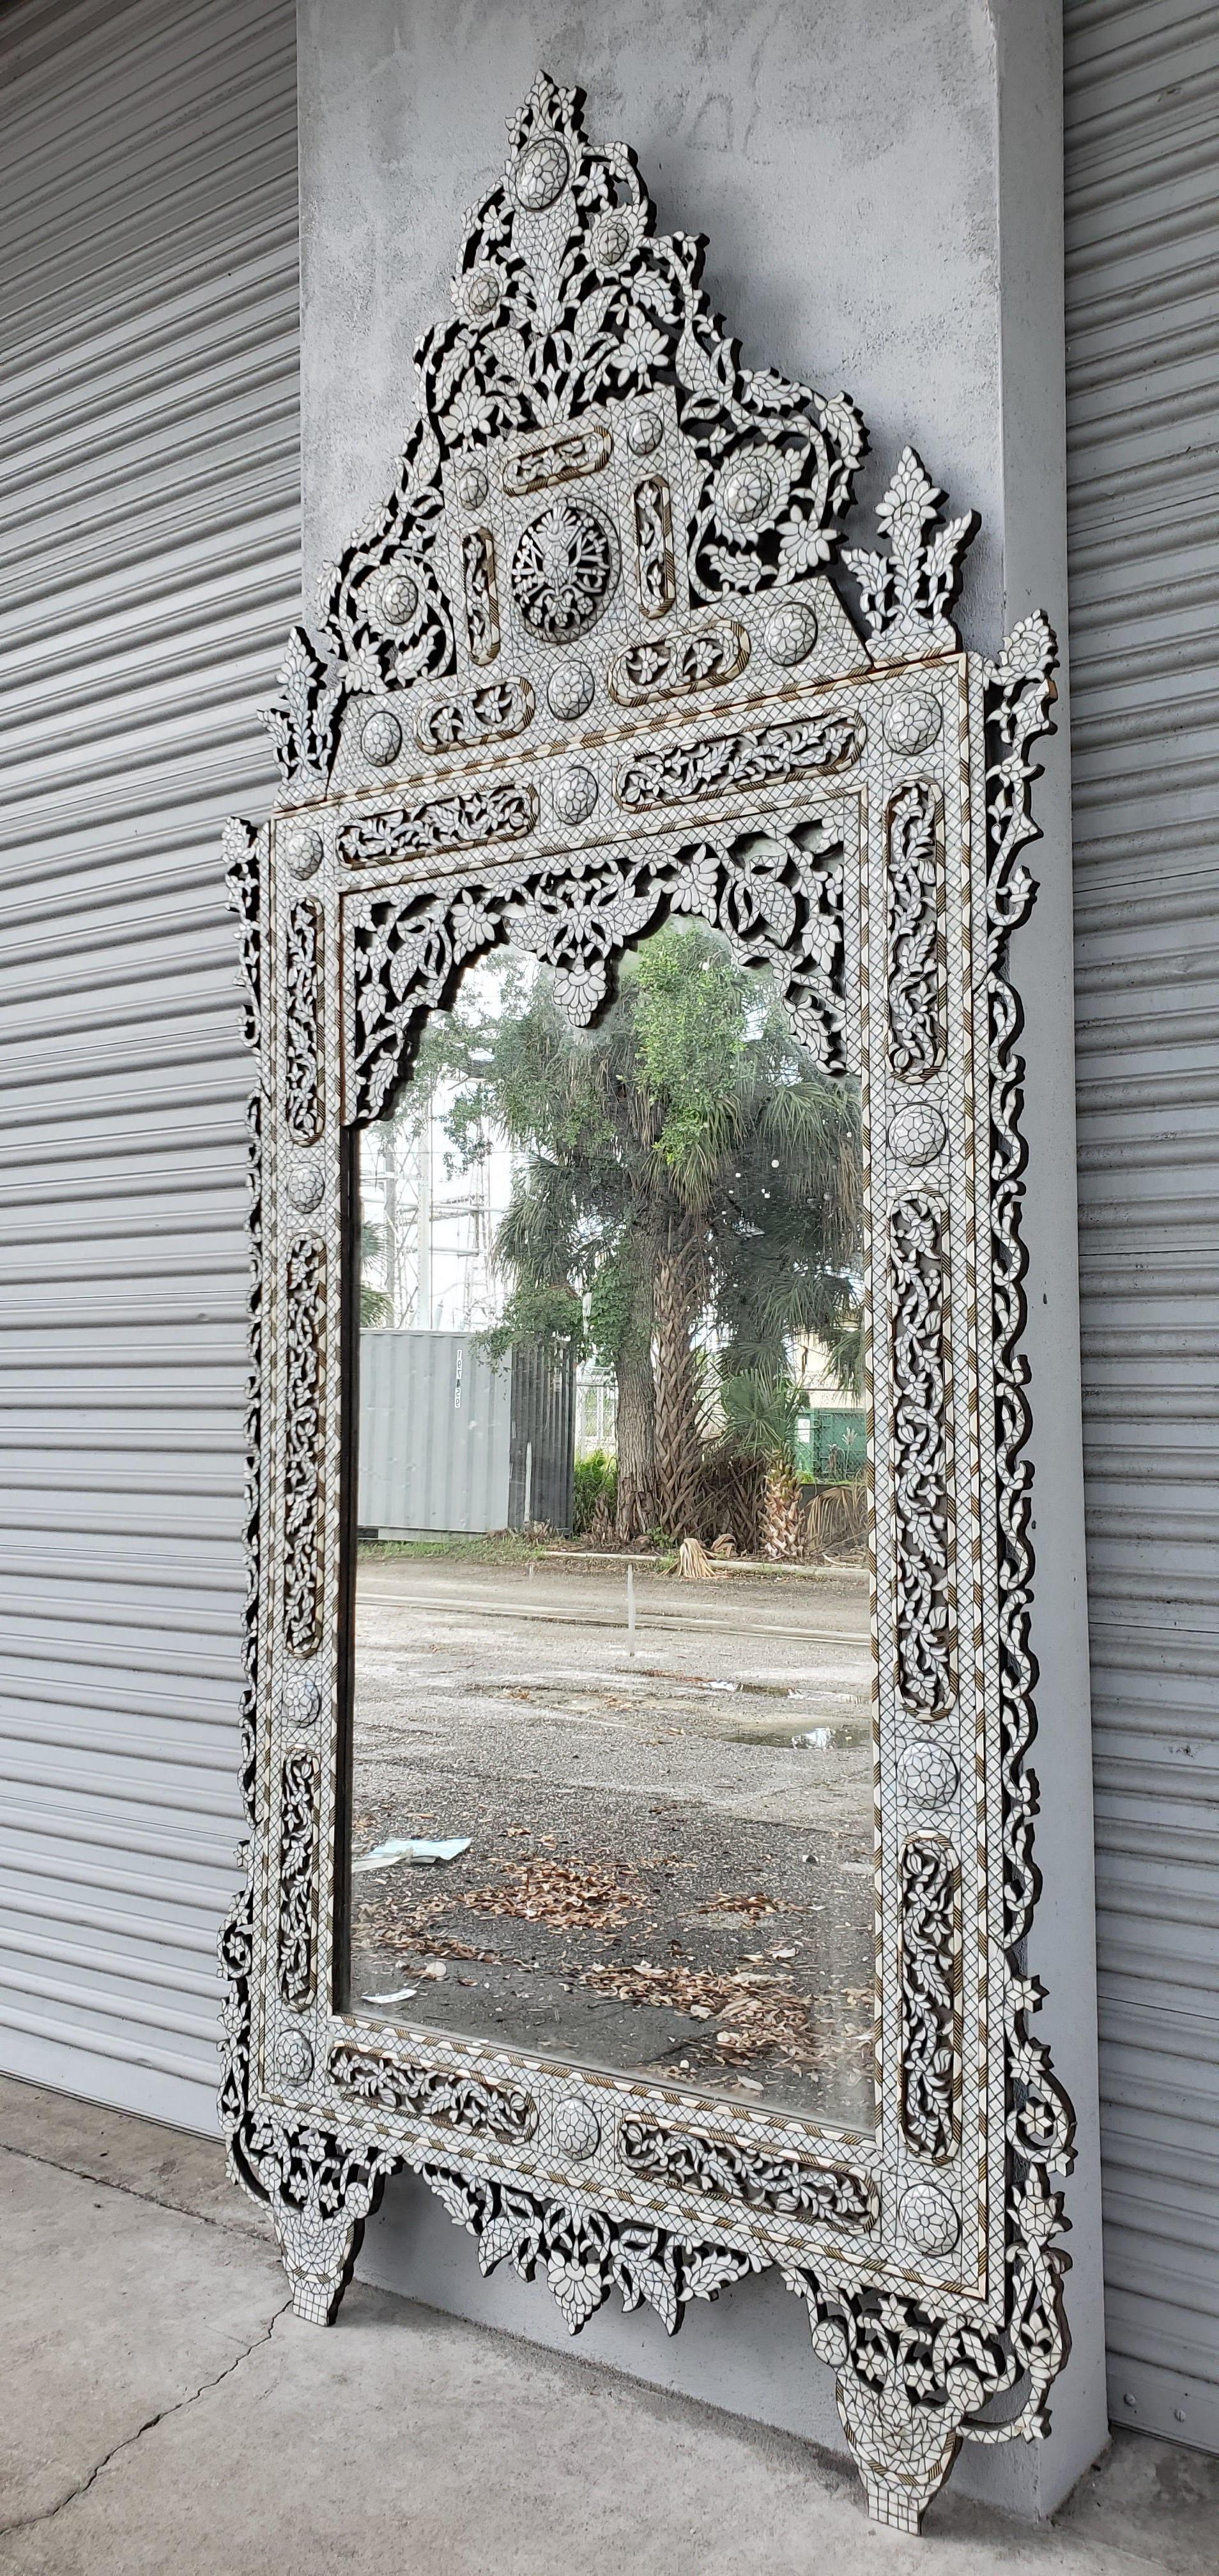 This vintage handcrafted inlaid mirror is crafted from individuality cut pieces of mother of pearl and camel bone. The high bonnet top is geometric style design is detachable for easy transport.